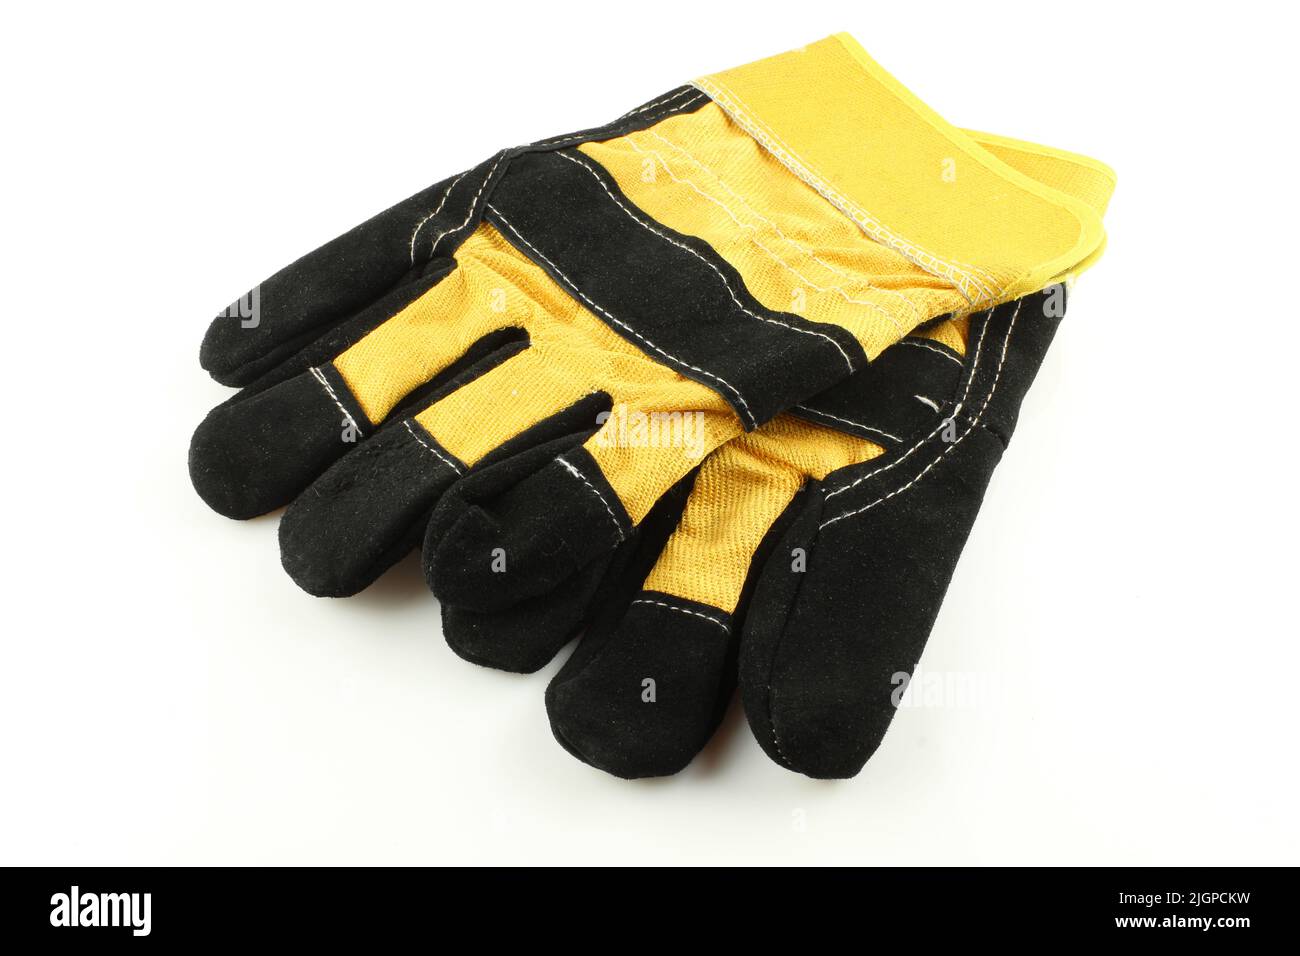 Black and yellow working gloves isolated on white background. Safety work wear Stock Photo